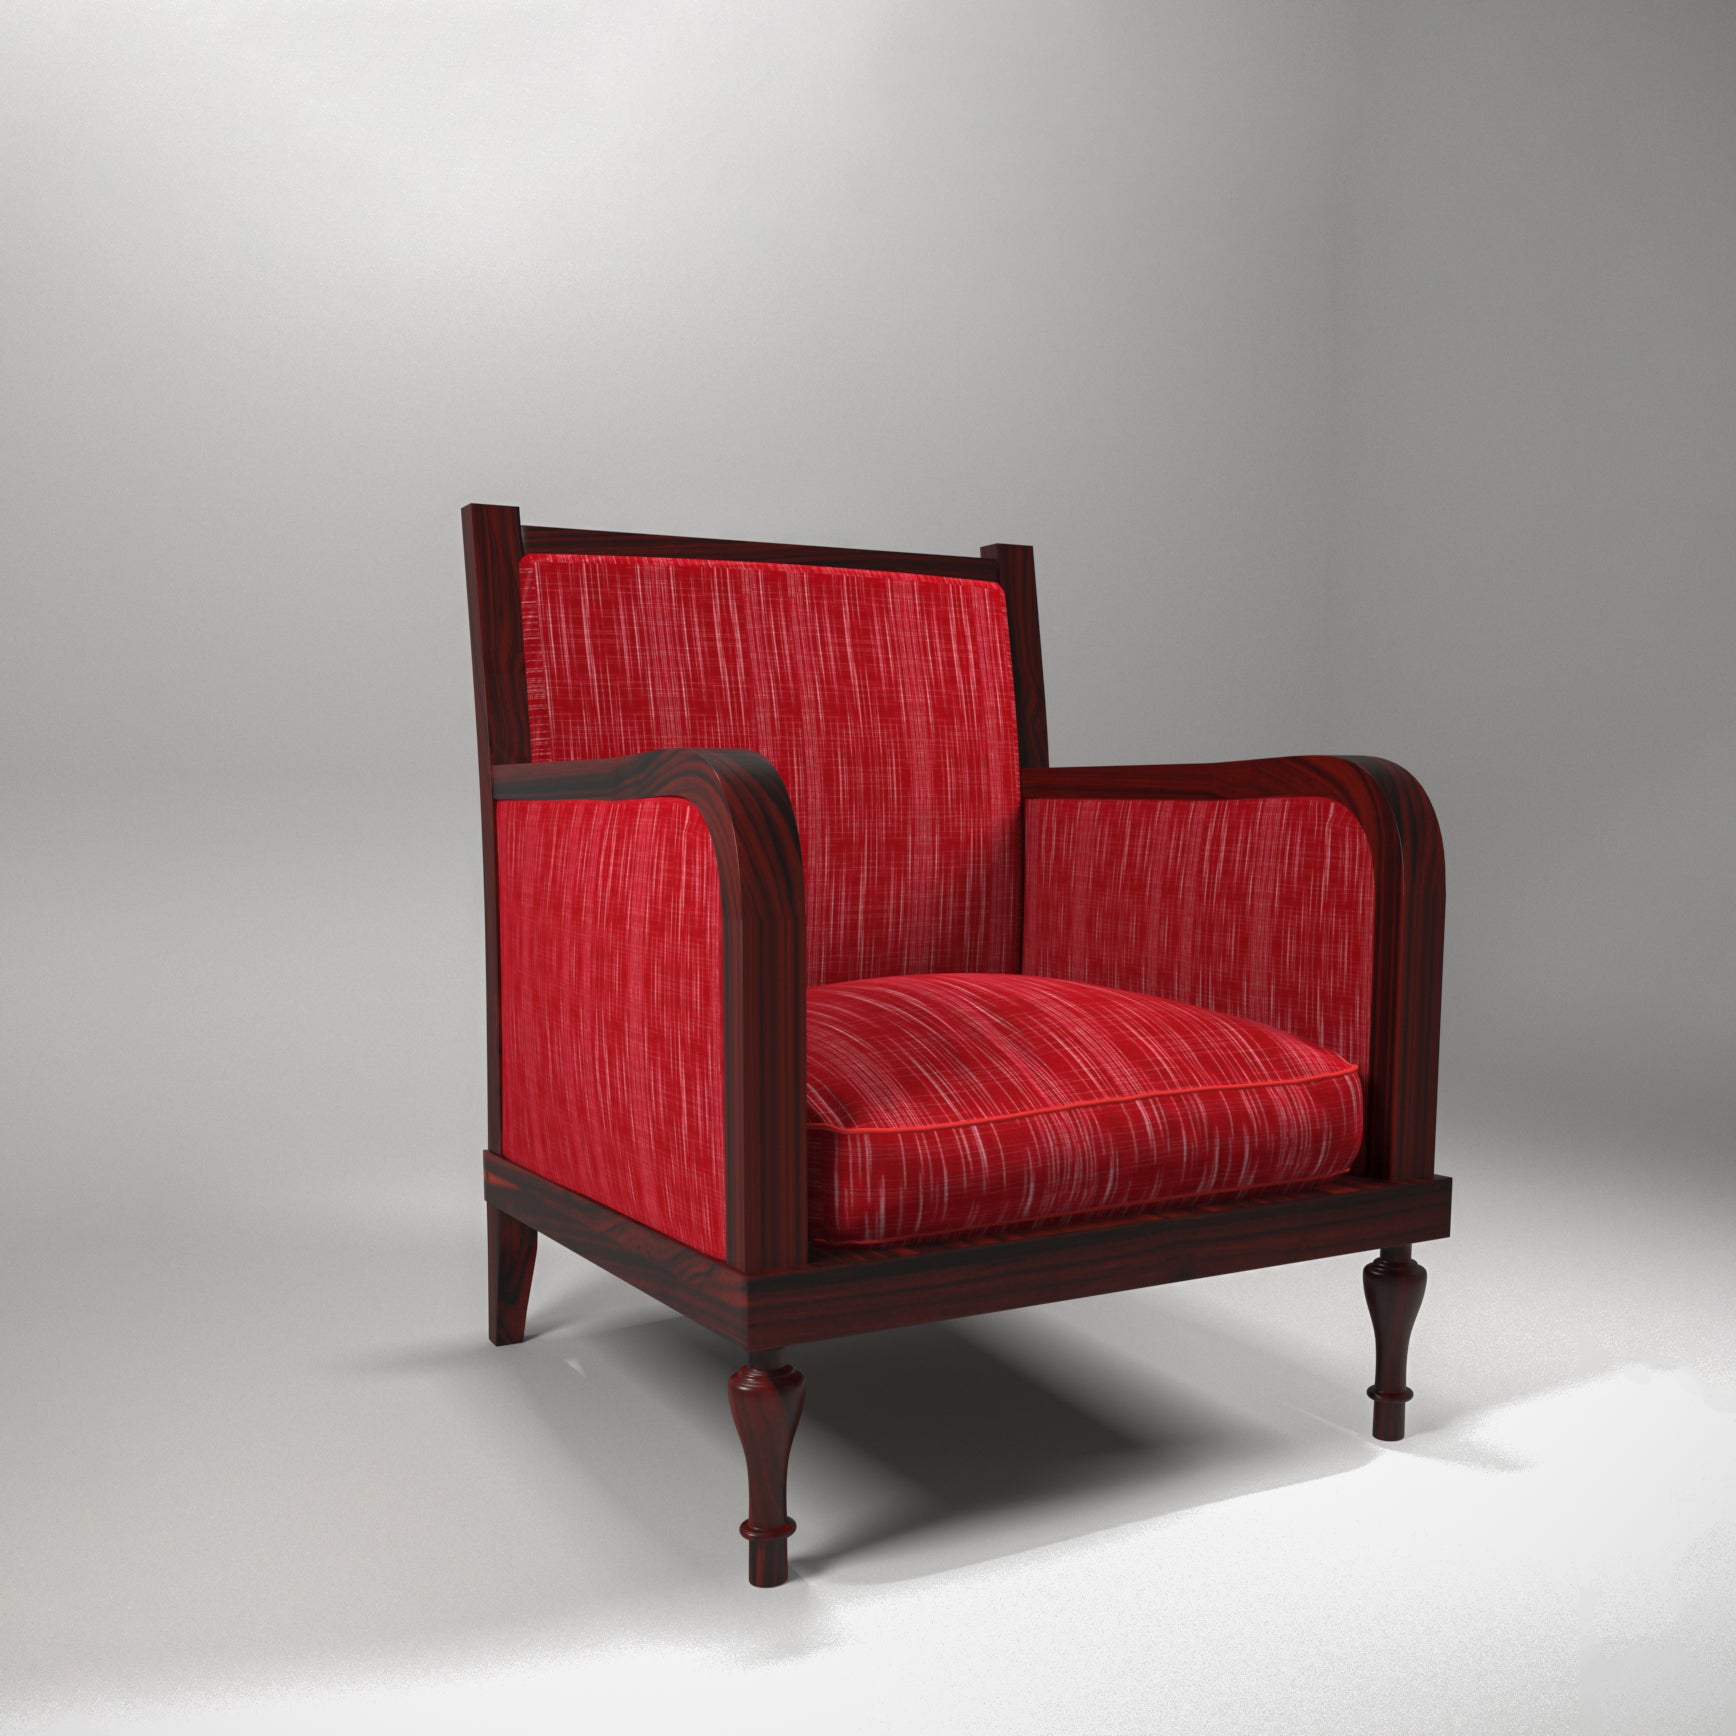 Rustic Red Upholstered Handmade Wooden Arm Chair for Home Arm Chair